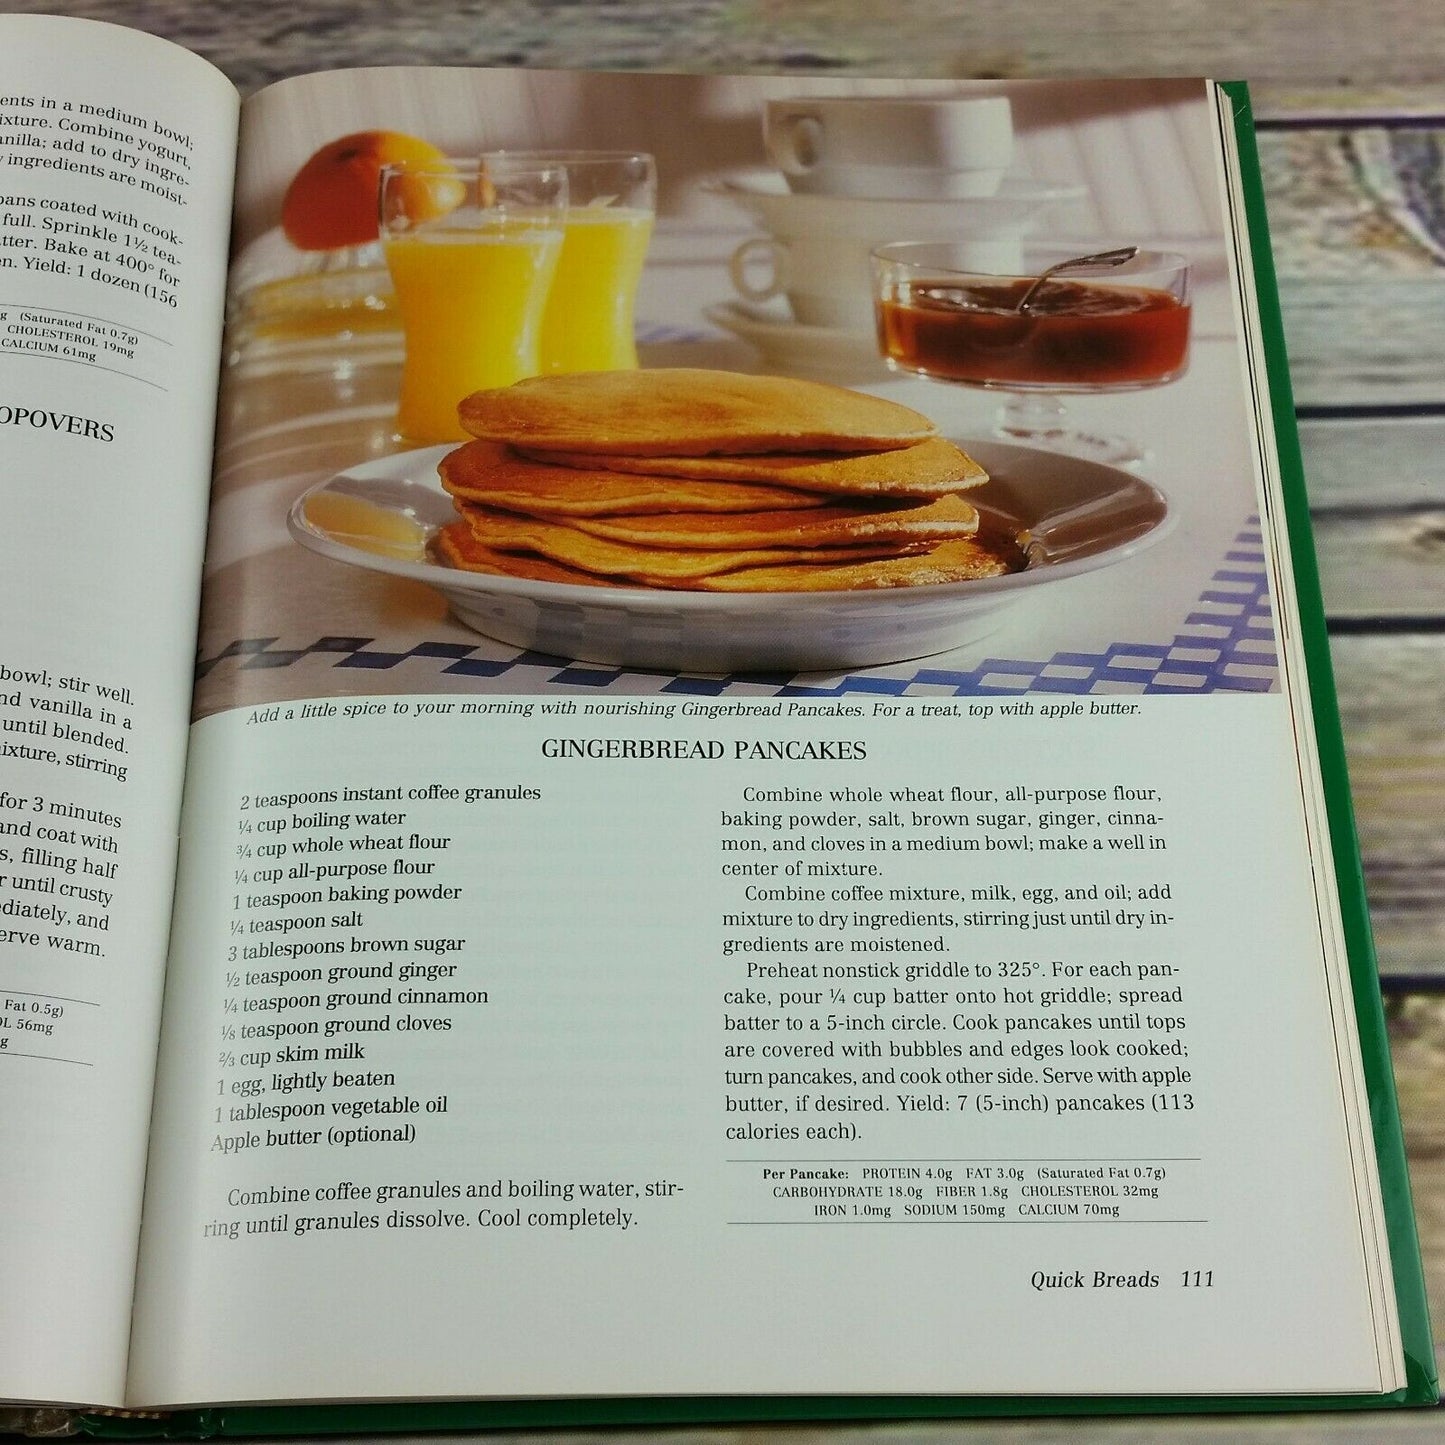 Vintage Cookbook Le Creuset Cooking Light Recipes 1993 Hardcover Brunch Holiday - At Grandma's Table